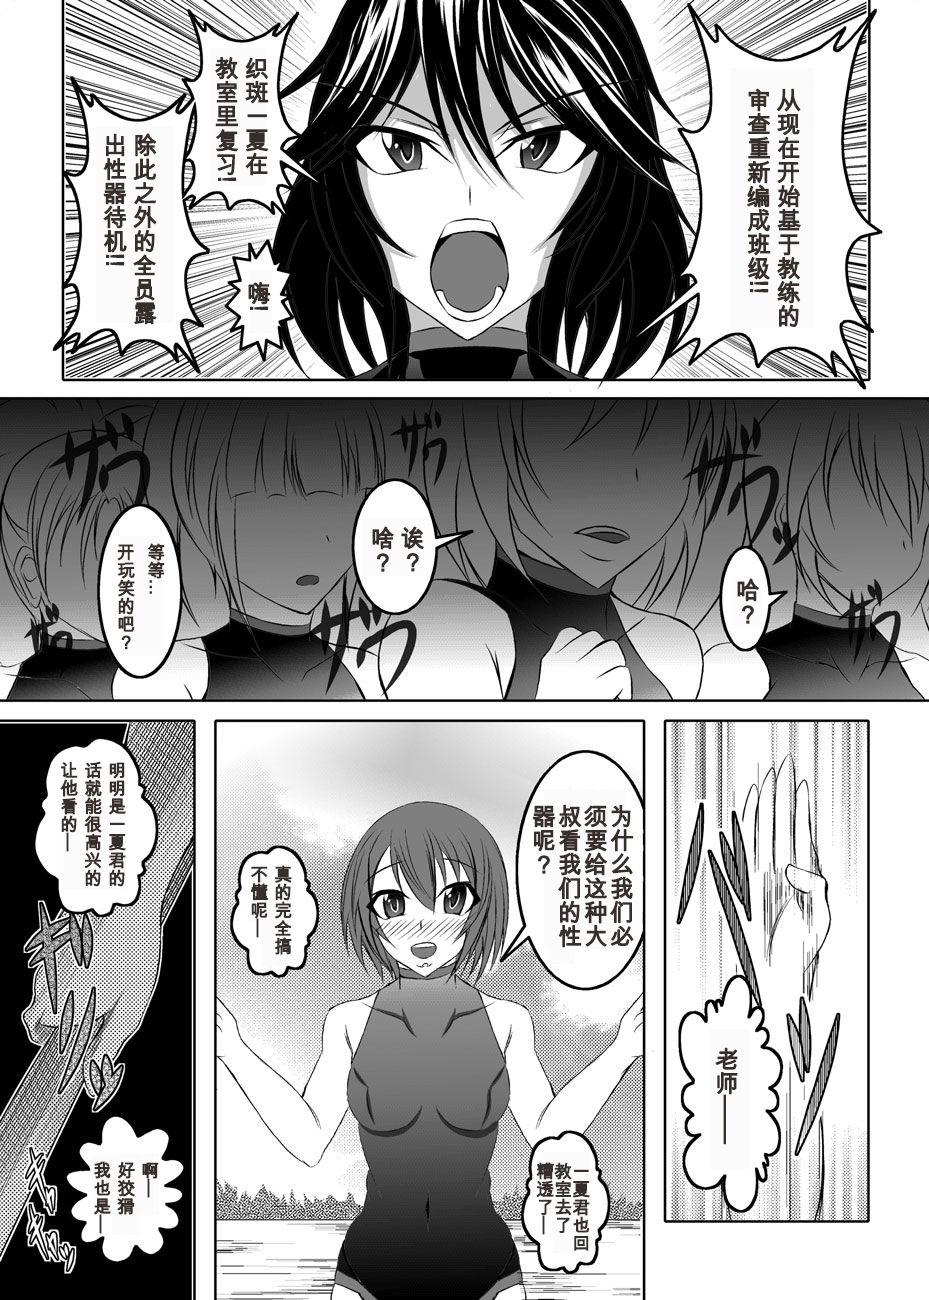 Family Taboo GIRLS MEET DQN'S TINPO - Infinite stratos Old And Young - Page 4